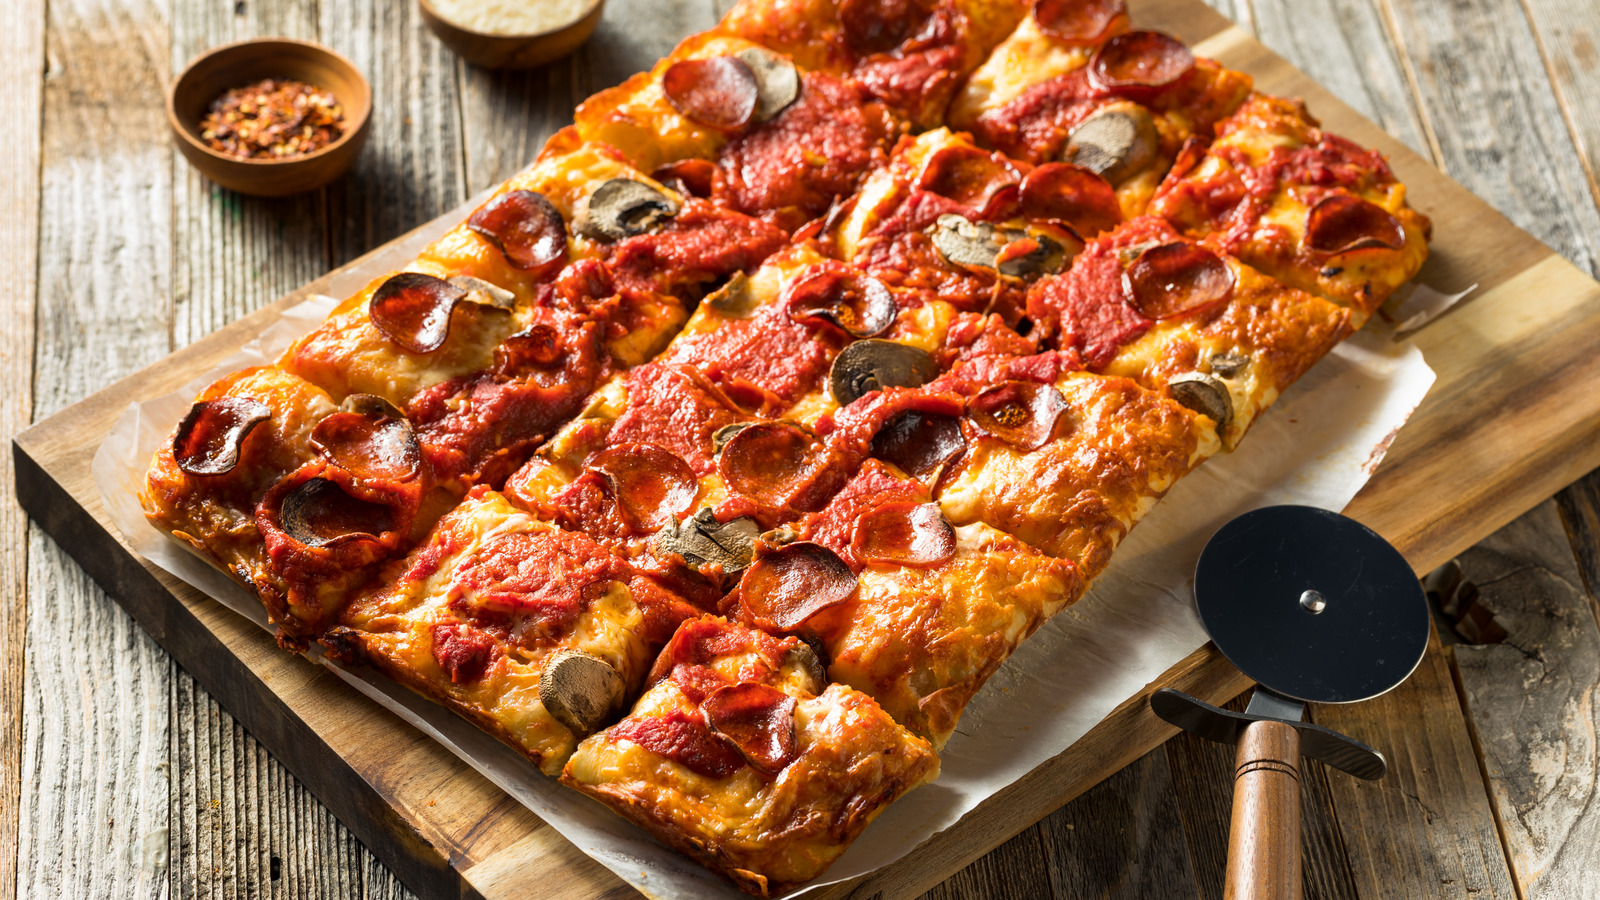 https://www.tastingtable.com/img/gallery/what-makes-detroit-style-pizza-so-unique/l-intro-1658996508.jpg